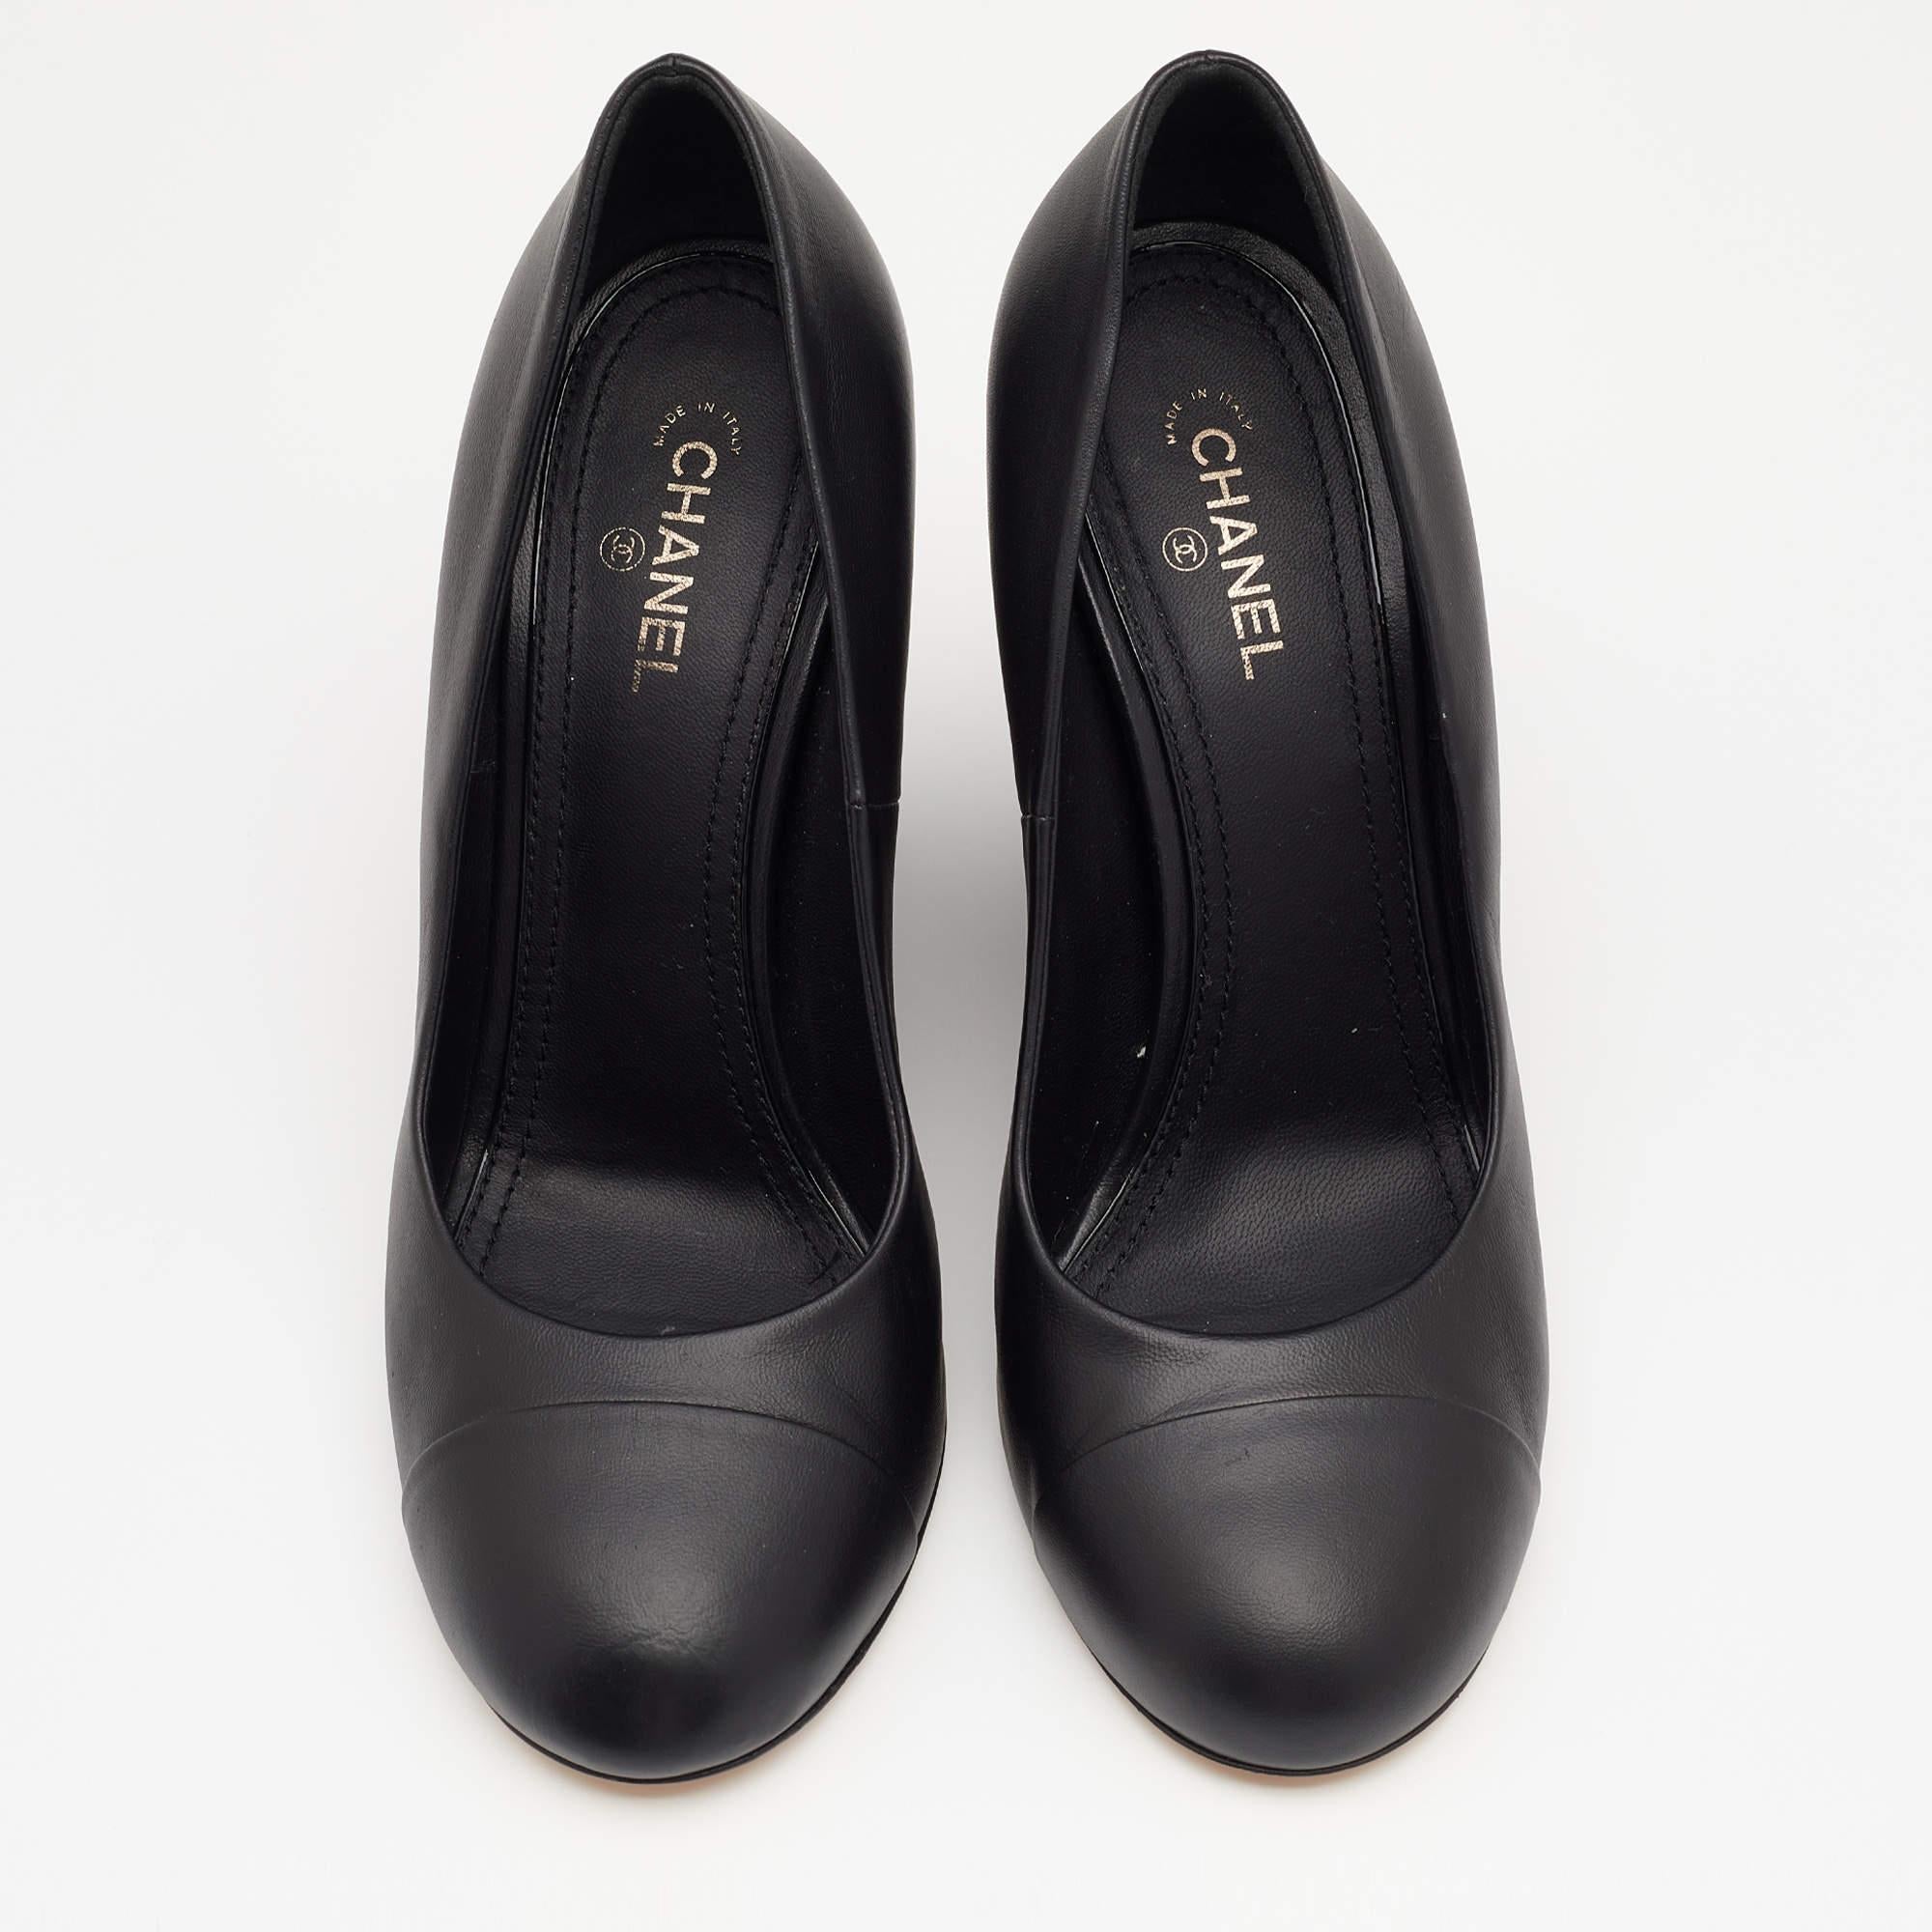 Walk stylishly in these classy pumps from the House of Chanel. Designed using black leather on the exterior, these pumps display wedge heels and rounded cap toes. They are finished with a slip-on style for ease. Match them with your formal dresses